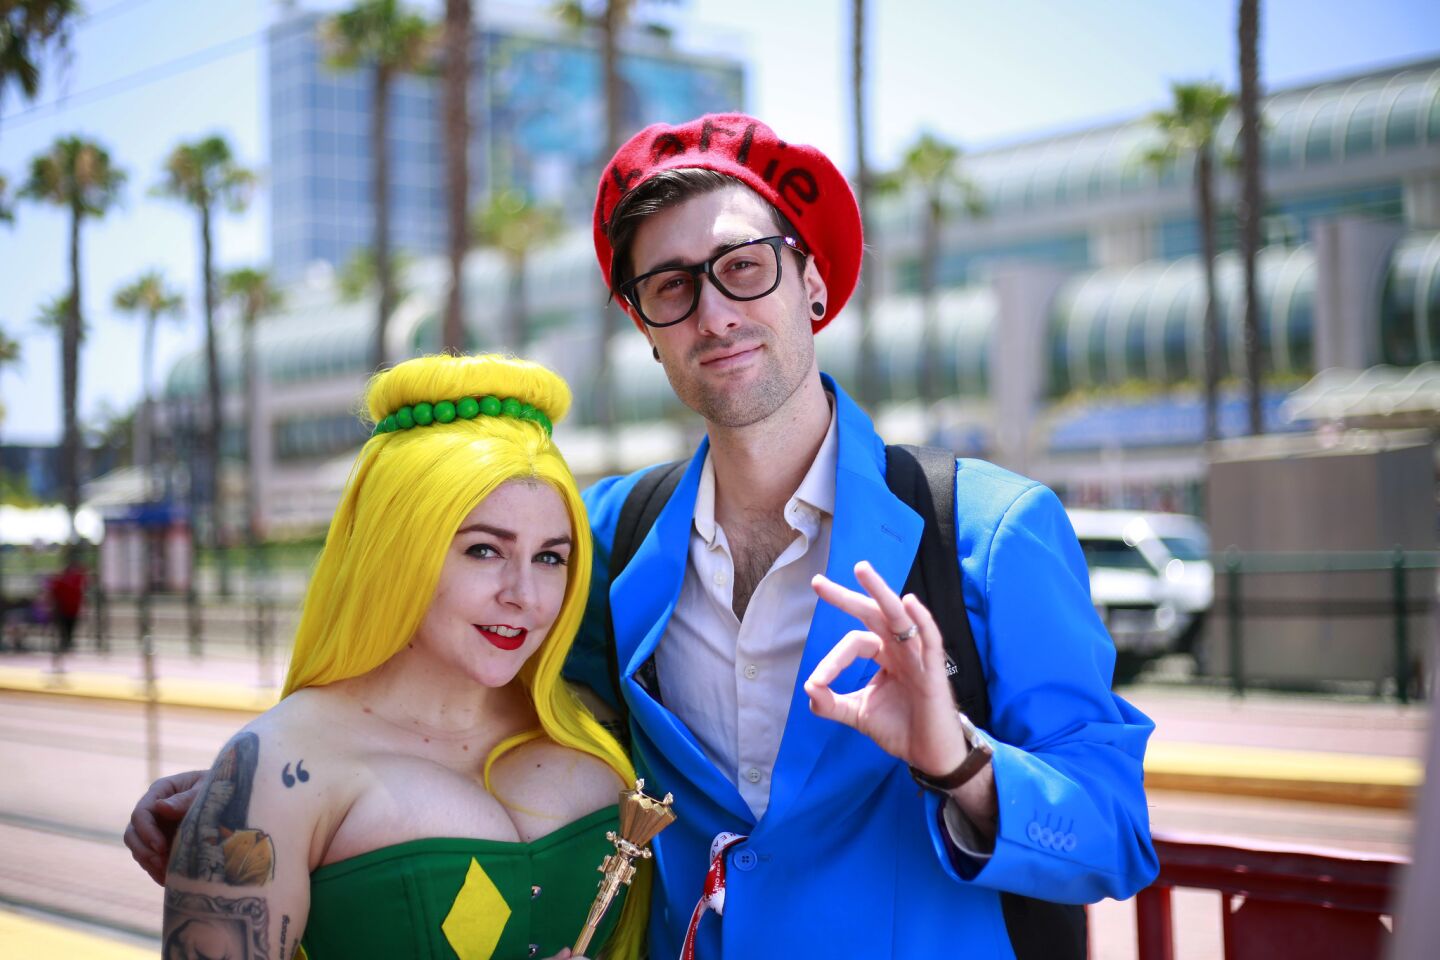 Getting into character at Comic-Con 2018